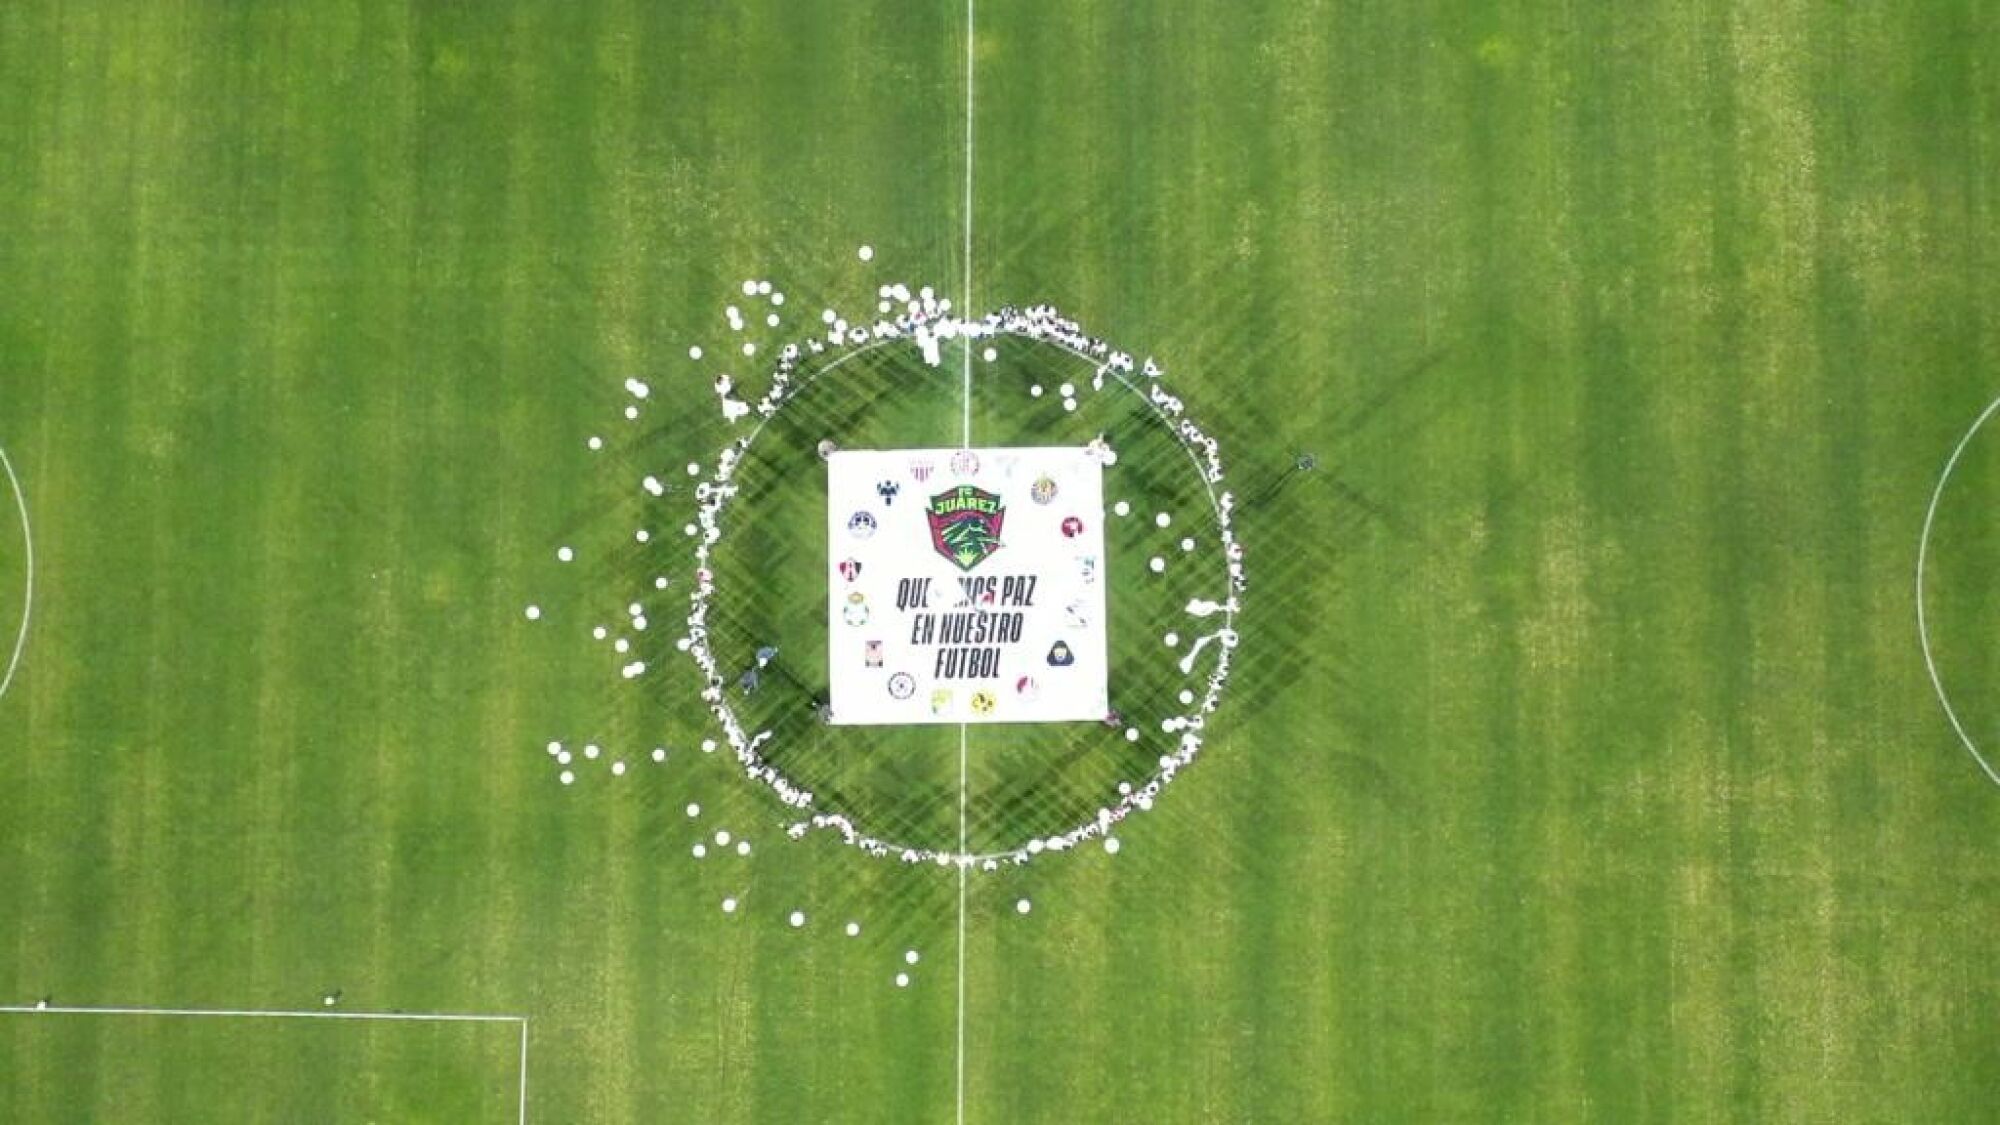 Children gather in the middle of a soccer field and hold a sign that calls for peace